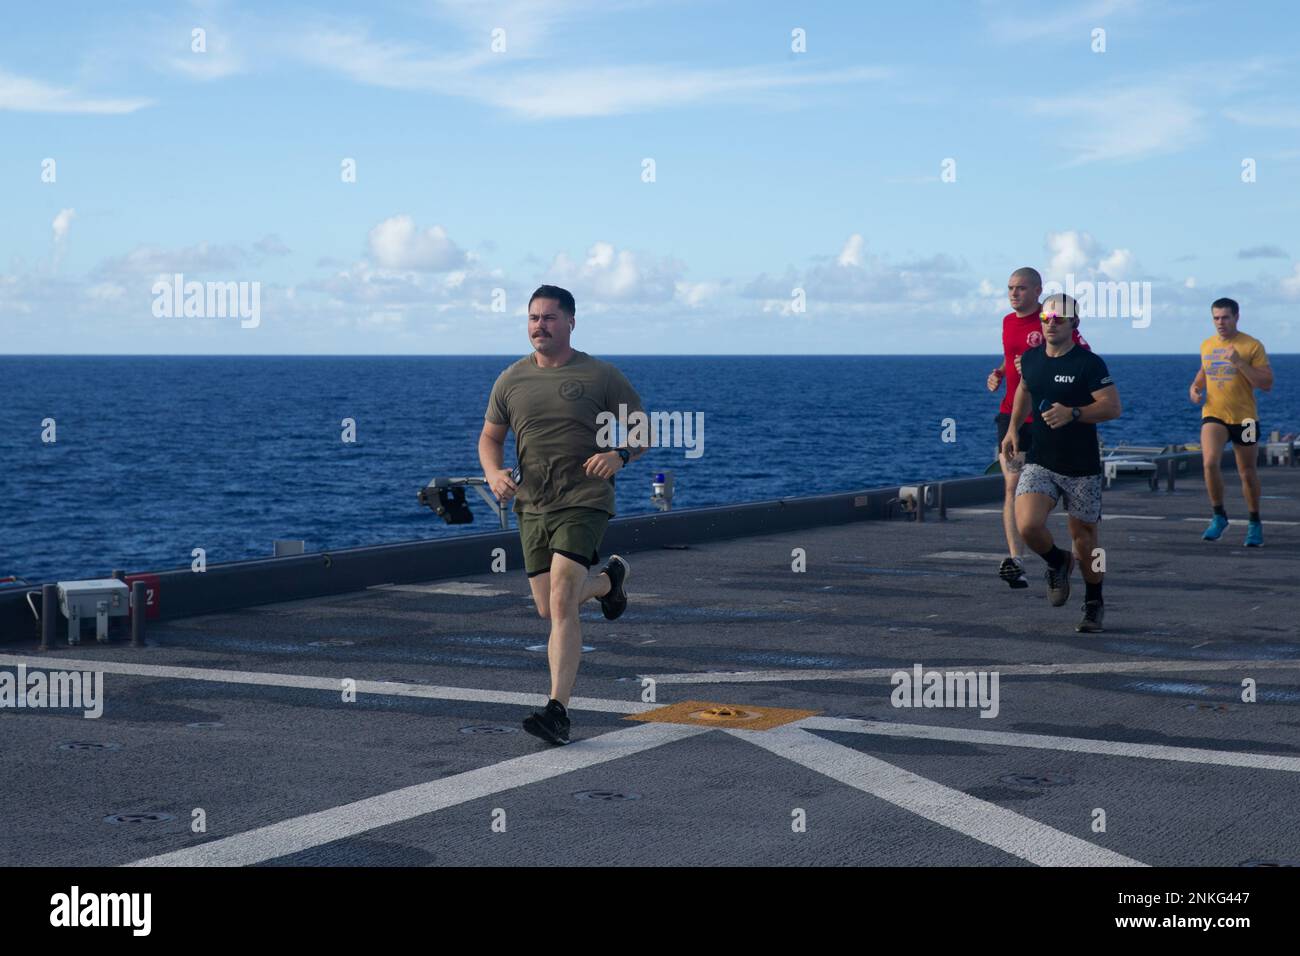 U.S. Marines with Battalion Landing Team 2/5, 31st Marine Expeditionary Unit, and U.S. Navy Sailors with USS Miguel Keith (ESB-5), take part in a 5 kilometer run aboard ESB-5, in the Philippine Sea, Aug. 14, 2022. The Marines and Sailors conducted a 5 kilometer run in honor of Lance Cpl. Miguel Keith. The 31st MEU is operating aboard ships of Amphibious Assault Ship USS Tripoli Amphibious Ready Group in the 7th fleet area of operations to enhance interoperability with allies and partners and serve as a ready response force to defend peace and stability in the Indo-Pacific region. Stock Photo